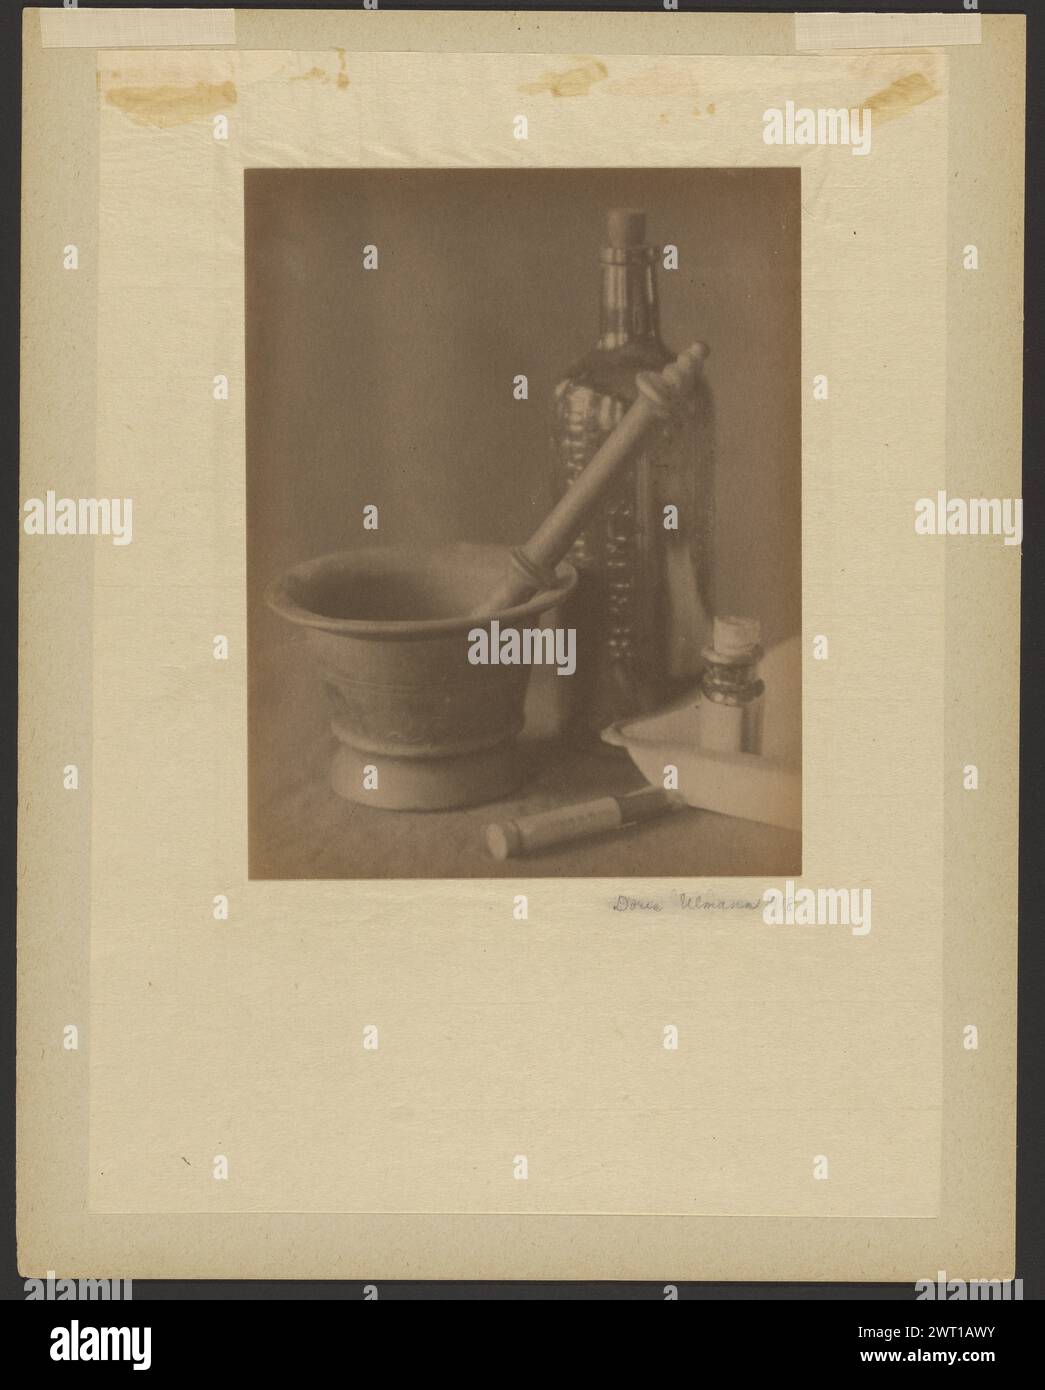 Darkroom Still Life. Doris Ulmann, photographer (American, 1882 - 1934) 1918 This still-life assembly of mortar, pestle, bottles, vial, and developing tray evokes the element of alchemy in photography. These objects immediately refer to the practice of medicine and to its potential power to stimulate the body's regenerative processes. In a related way, photography can be understood as the artist measuring and applying certain powders and liquids to create an image, one with the power to heal the spirit and to nourish and give life to the imagination and the soul. By photographing the tools of Stock Photo